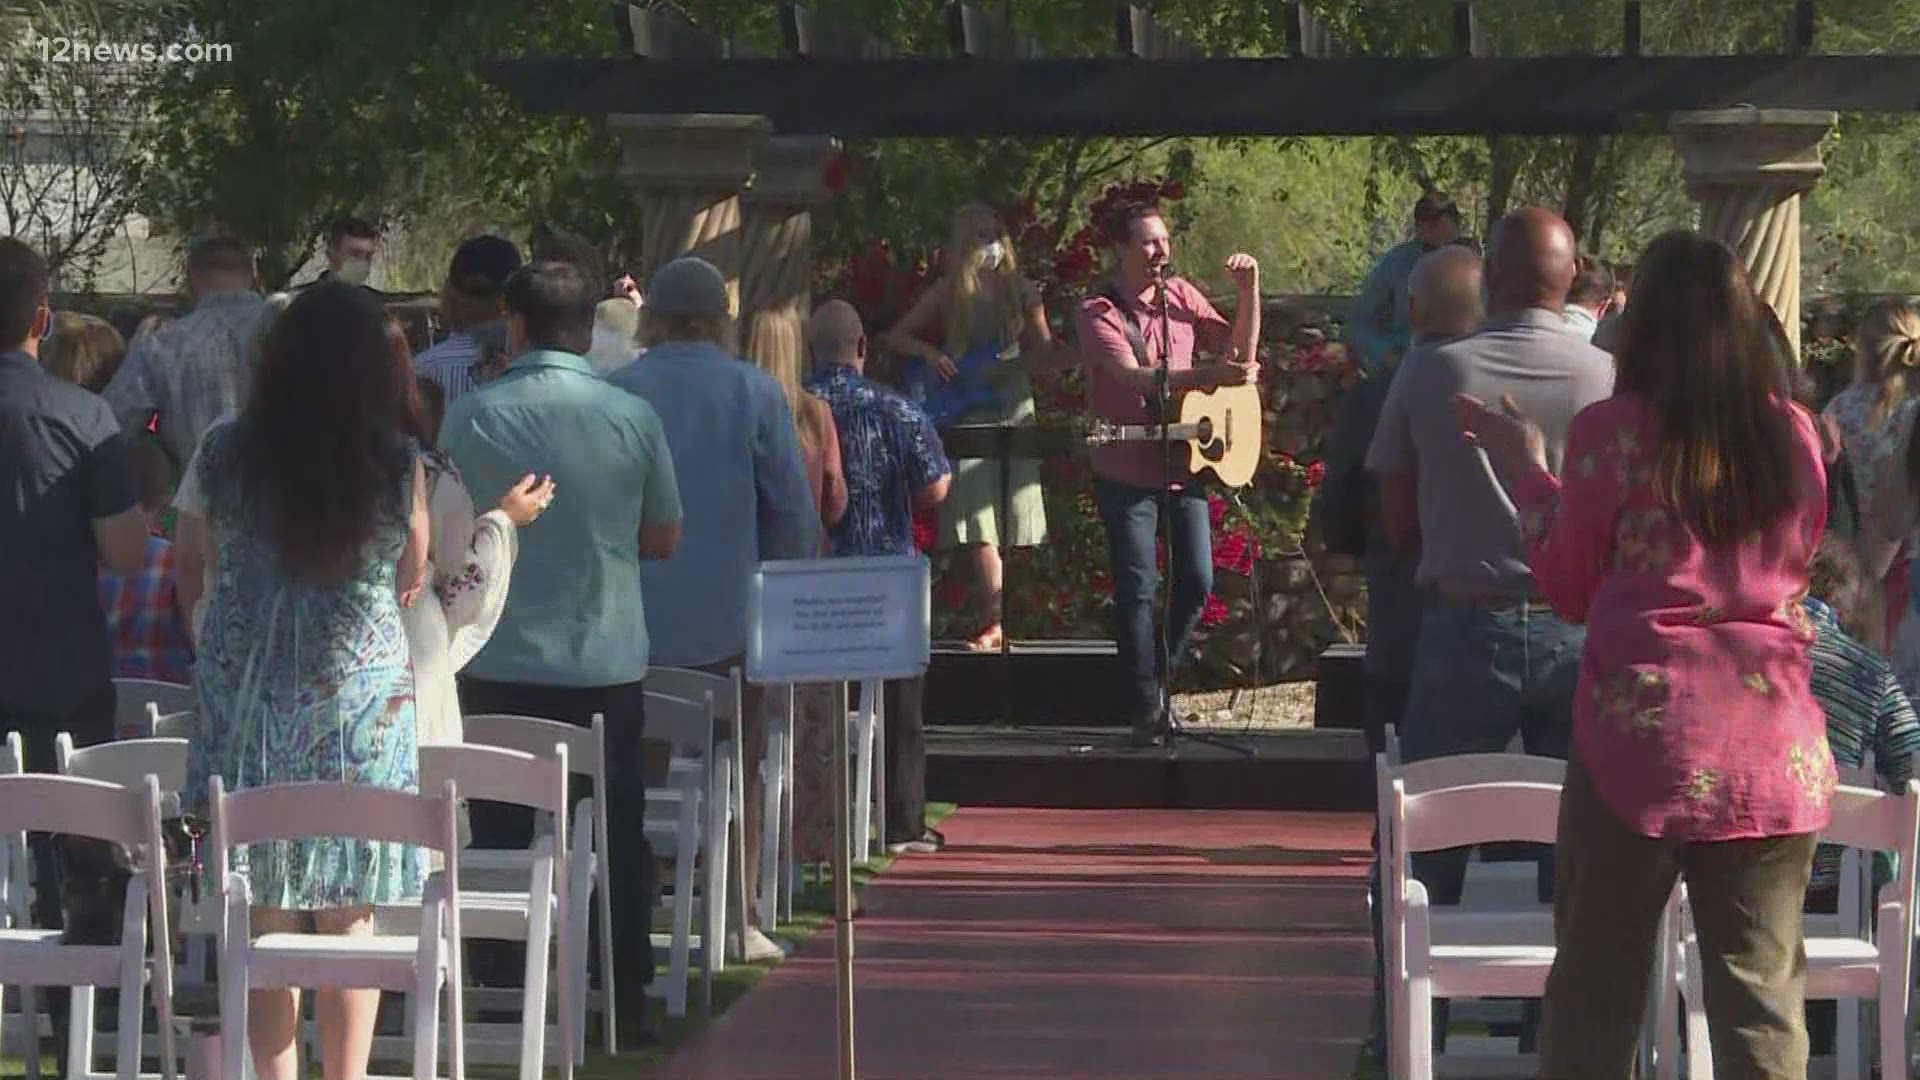 Many Valley Christian churches are holding outdoor services with safety protocols, like mandatory mask-wearing, in order to celebrate the Spring holiday.